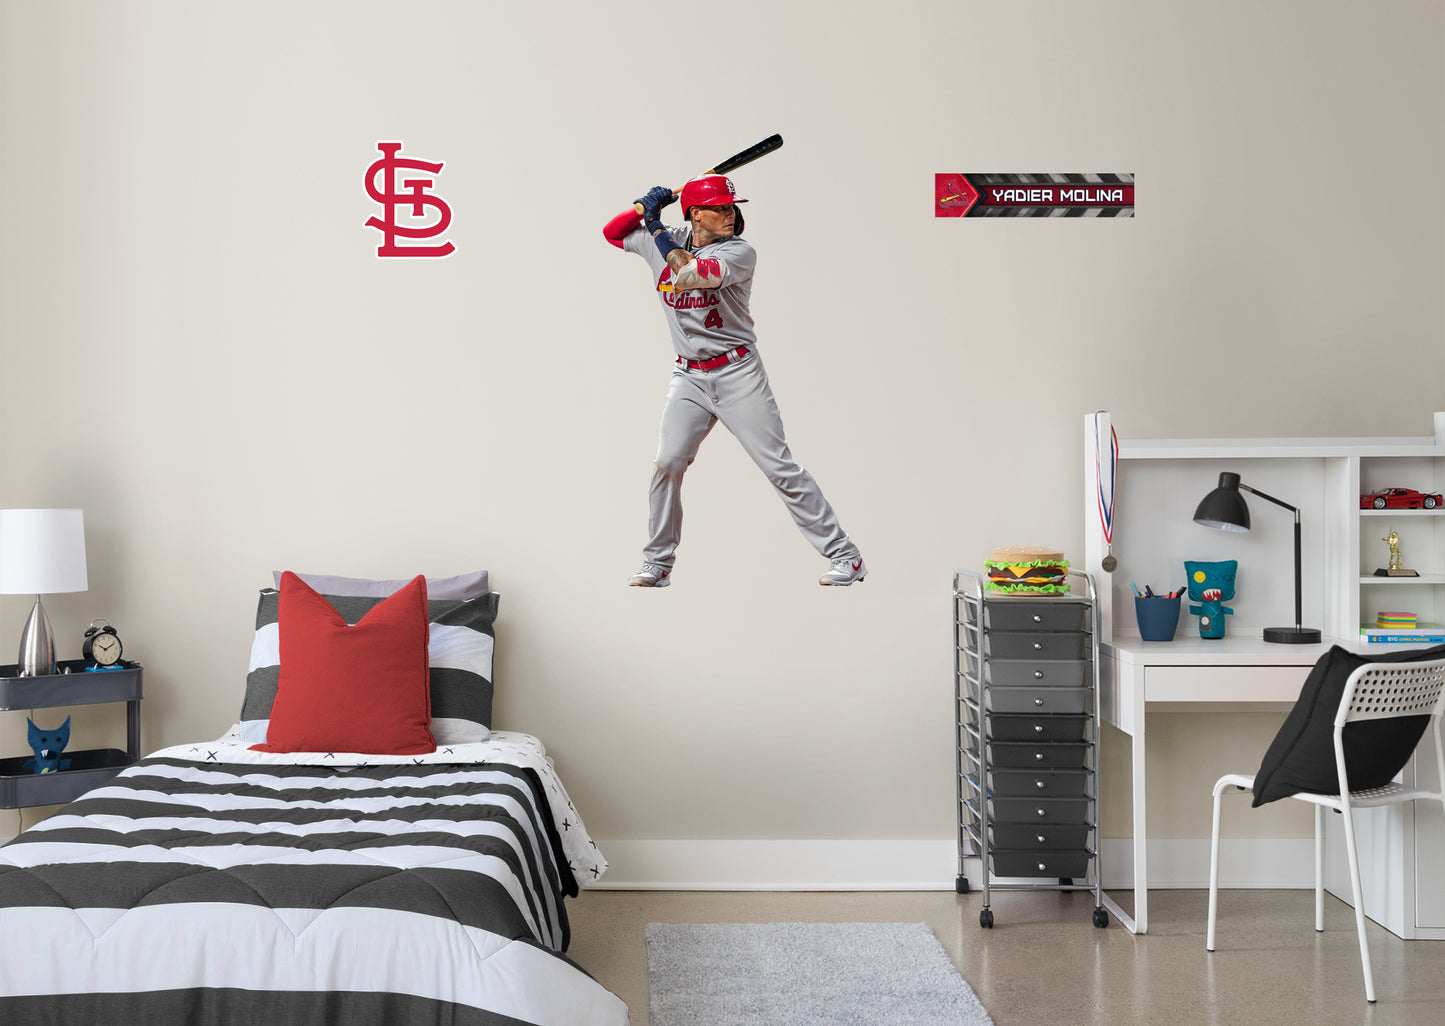 St. Louis Cardinals: Yadier Molina         - Officially Licensed MLB Removable Wall   Adhesive Decal